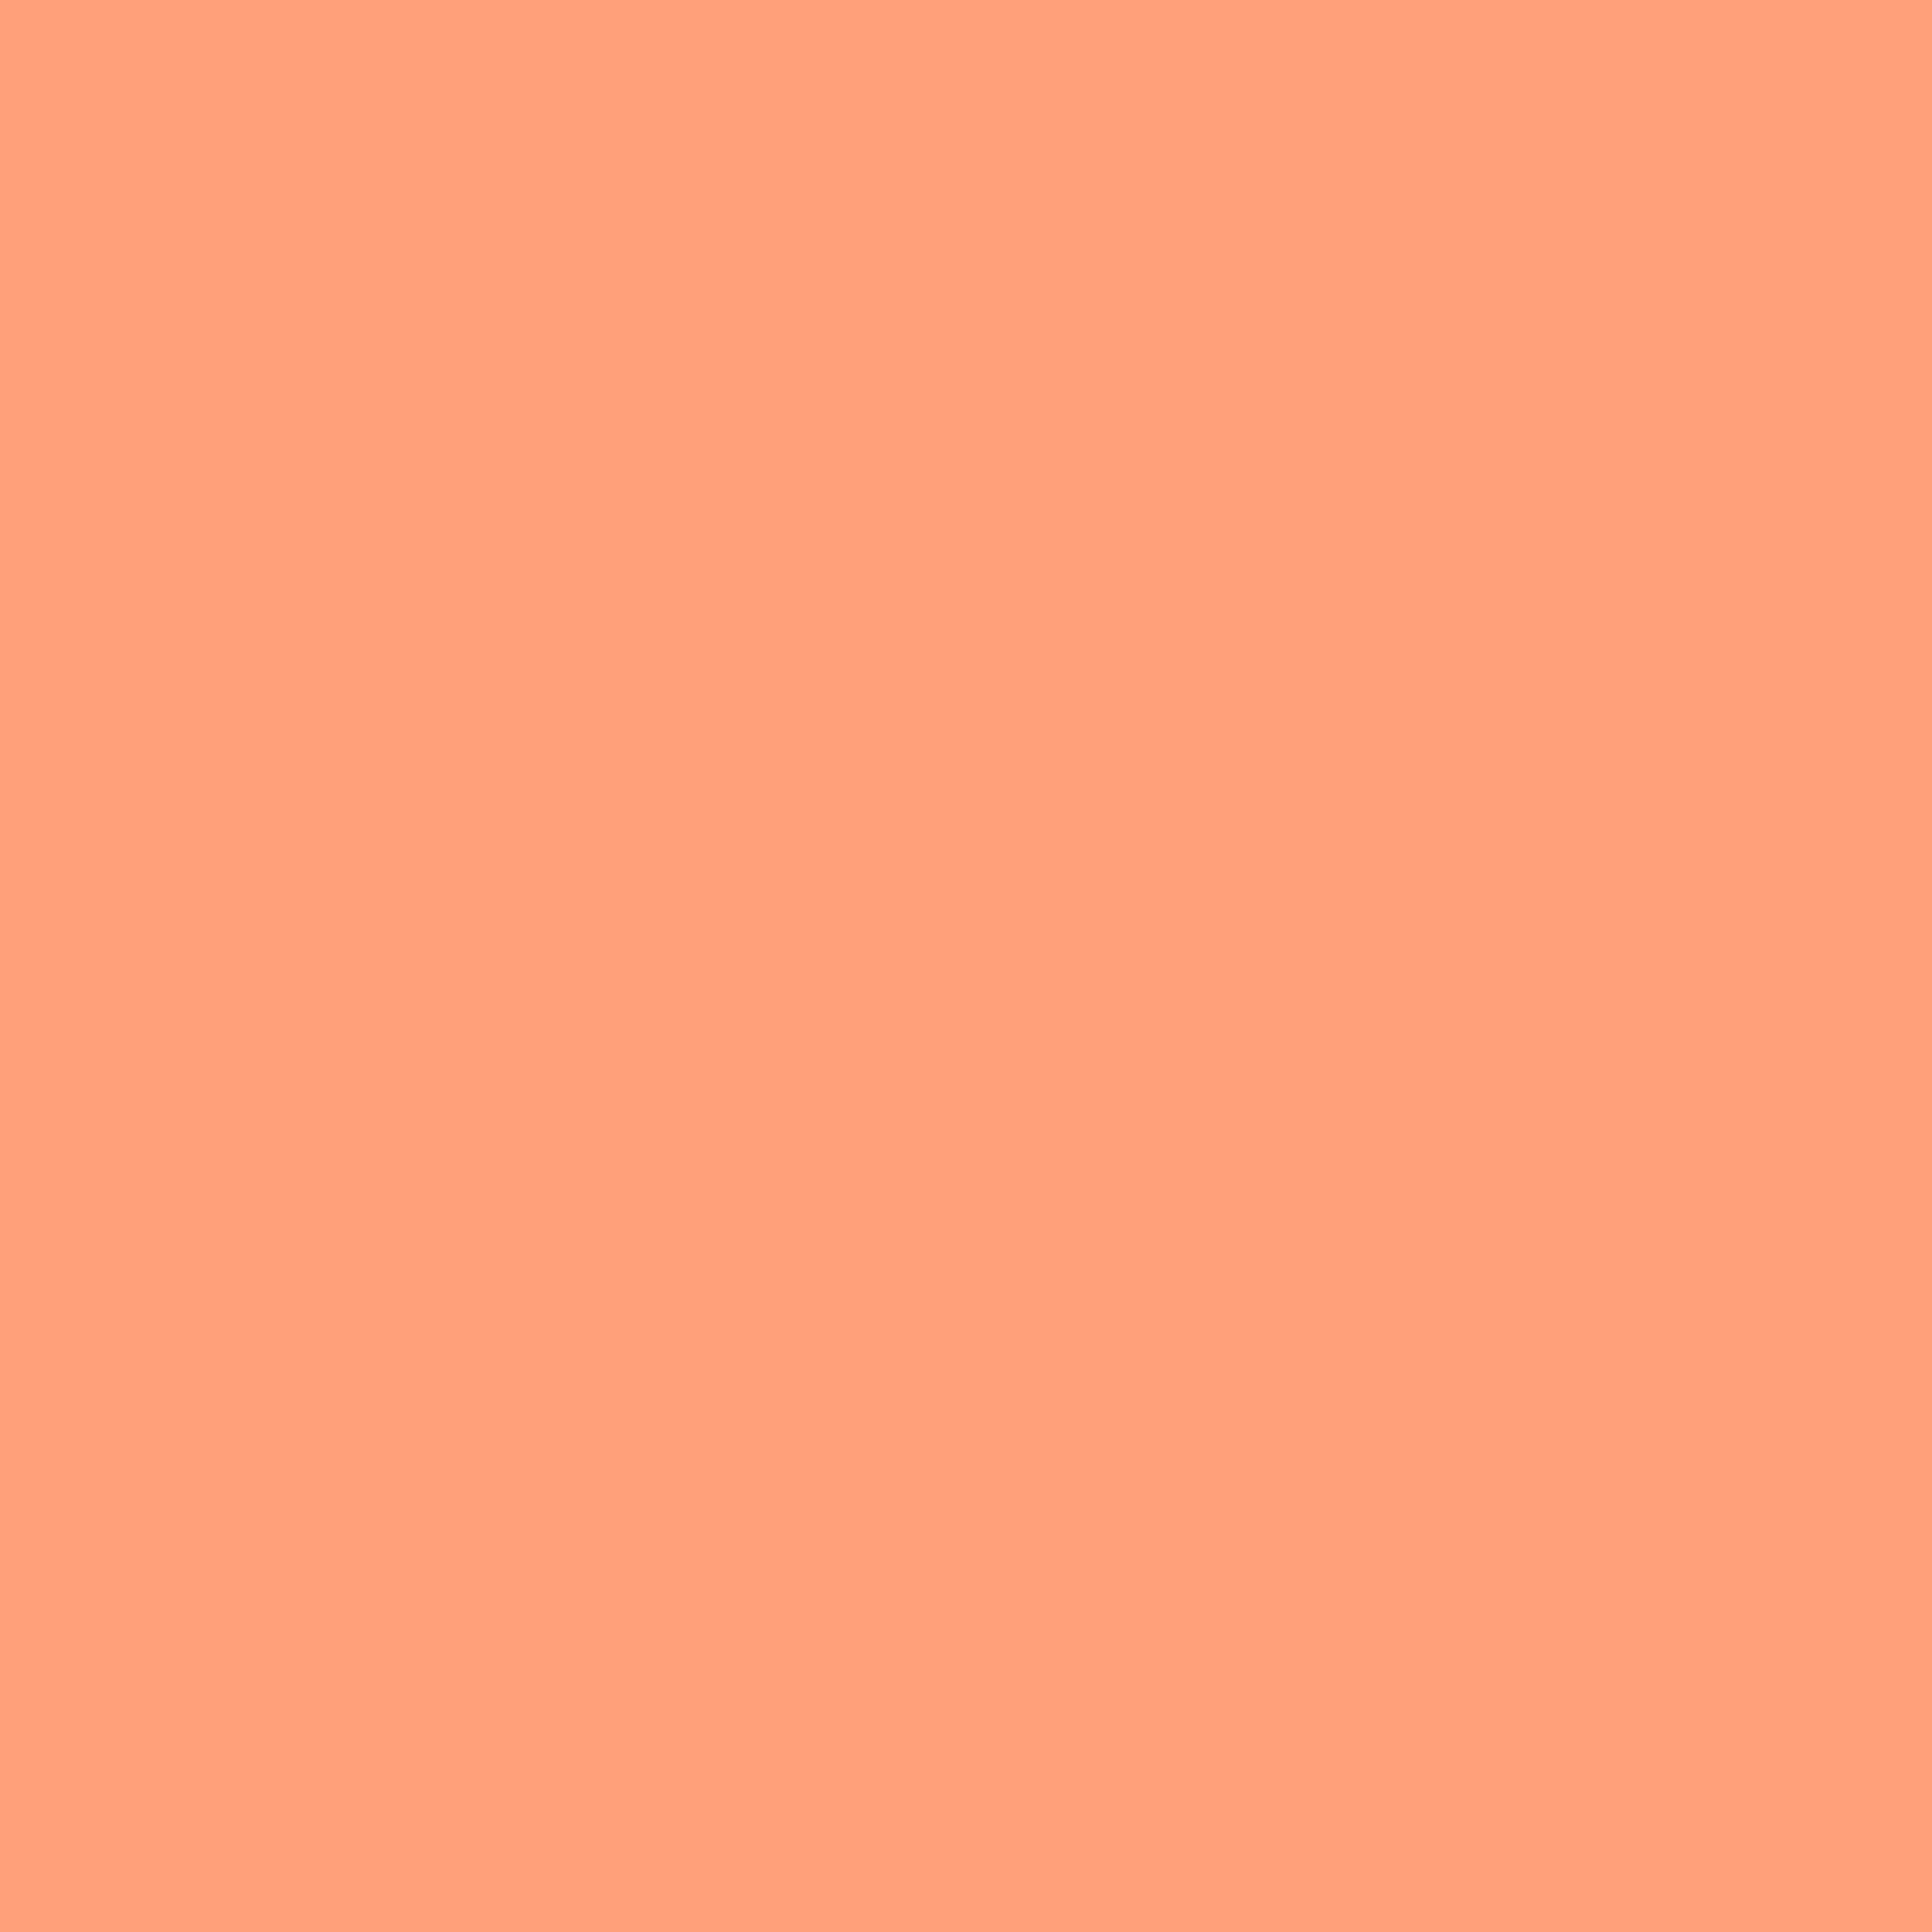 3600x3600 Light Salmon Solid Color Background